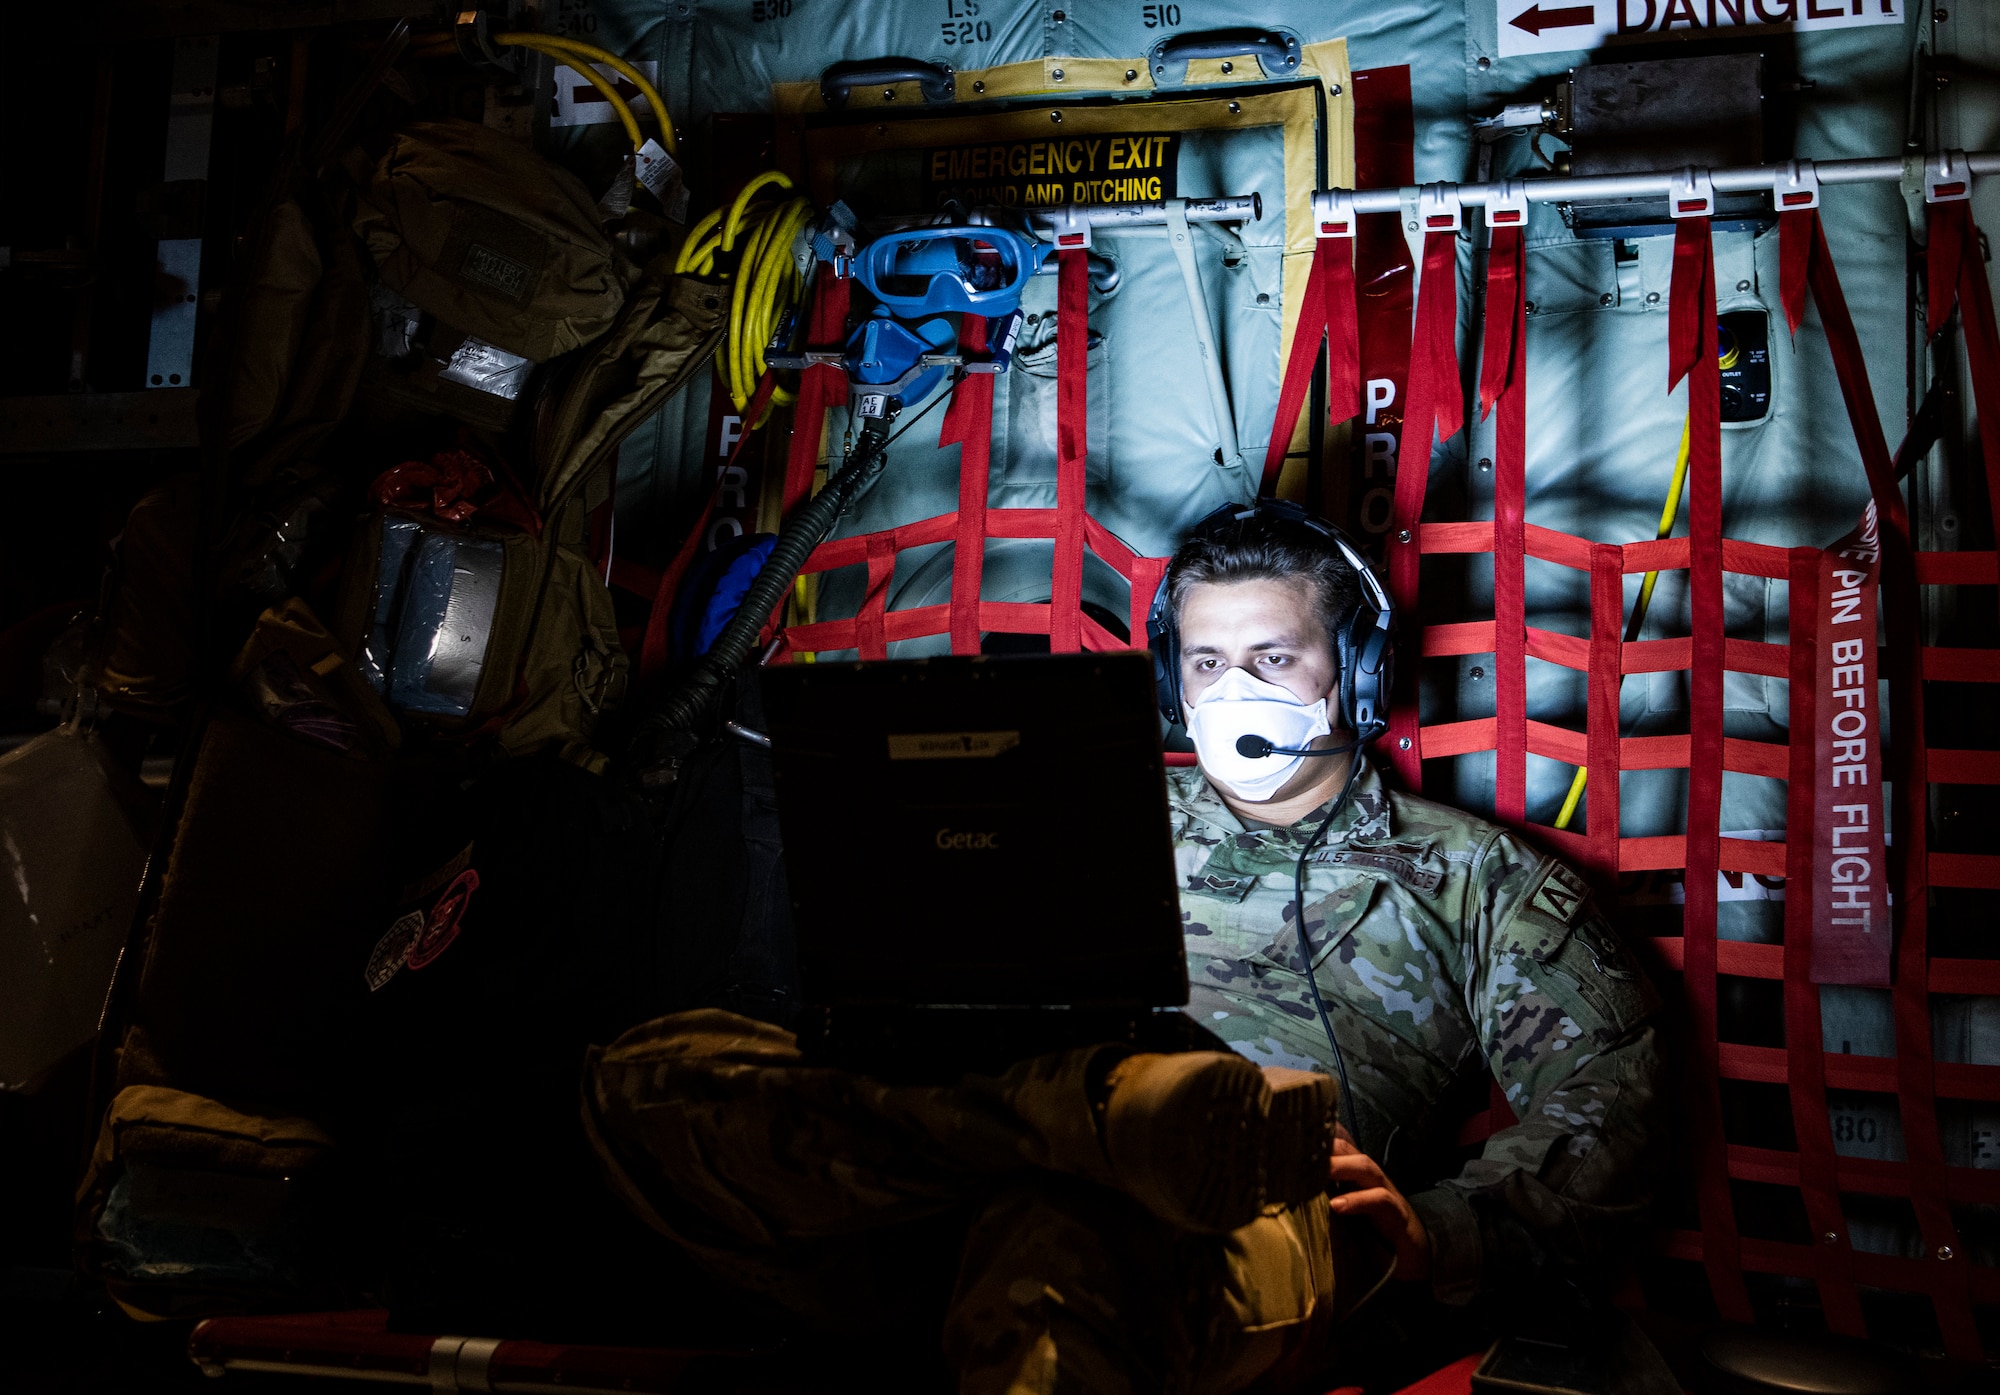 Airman typing on a computer